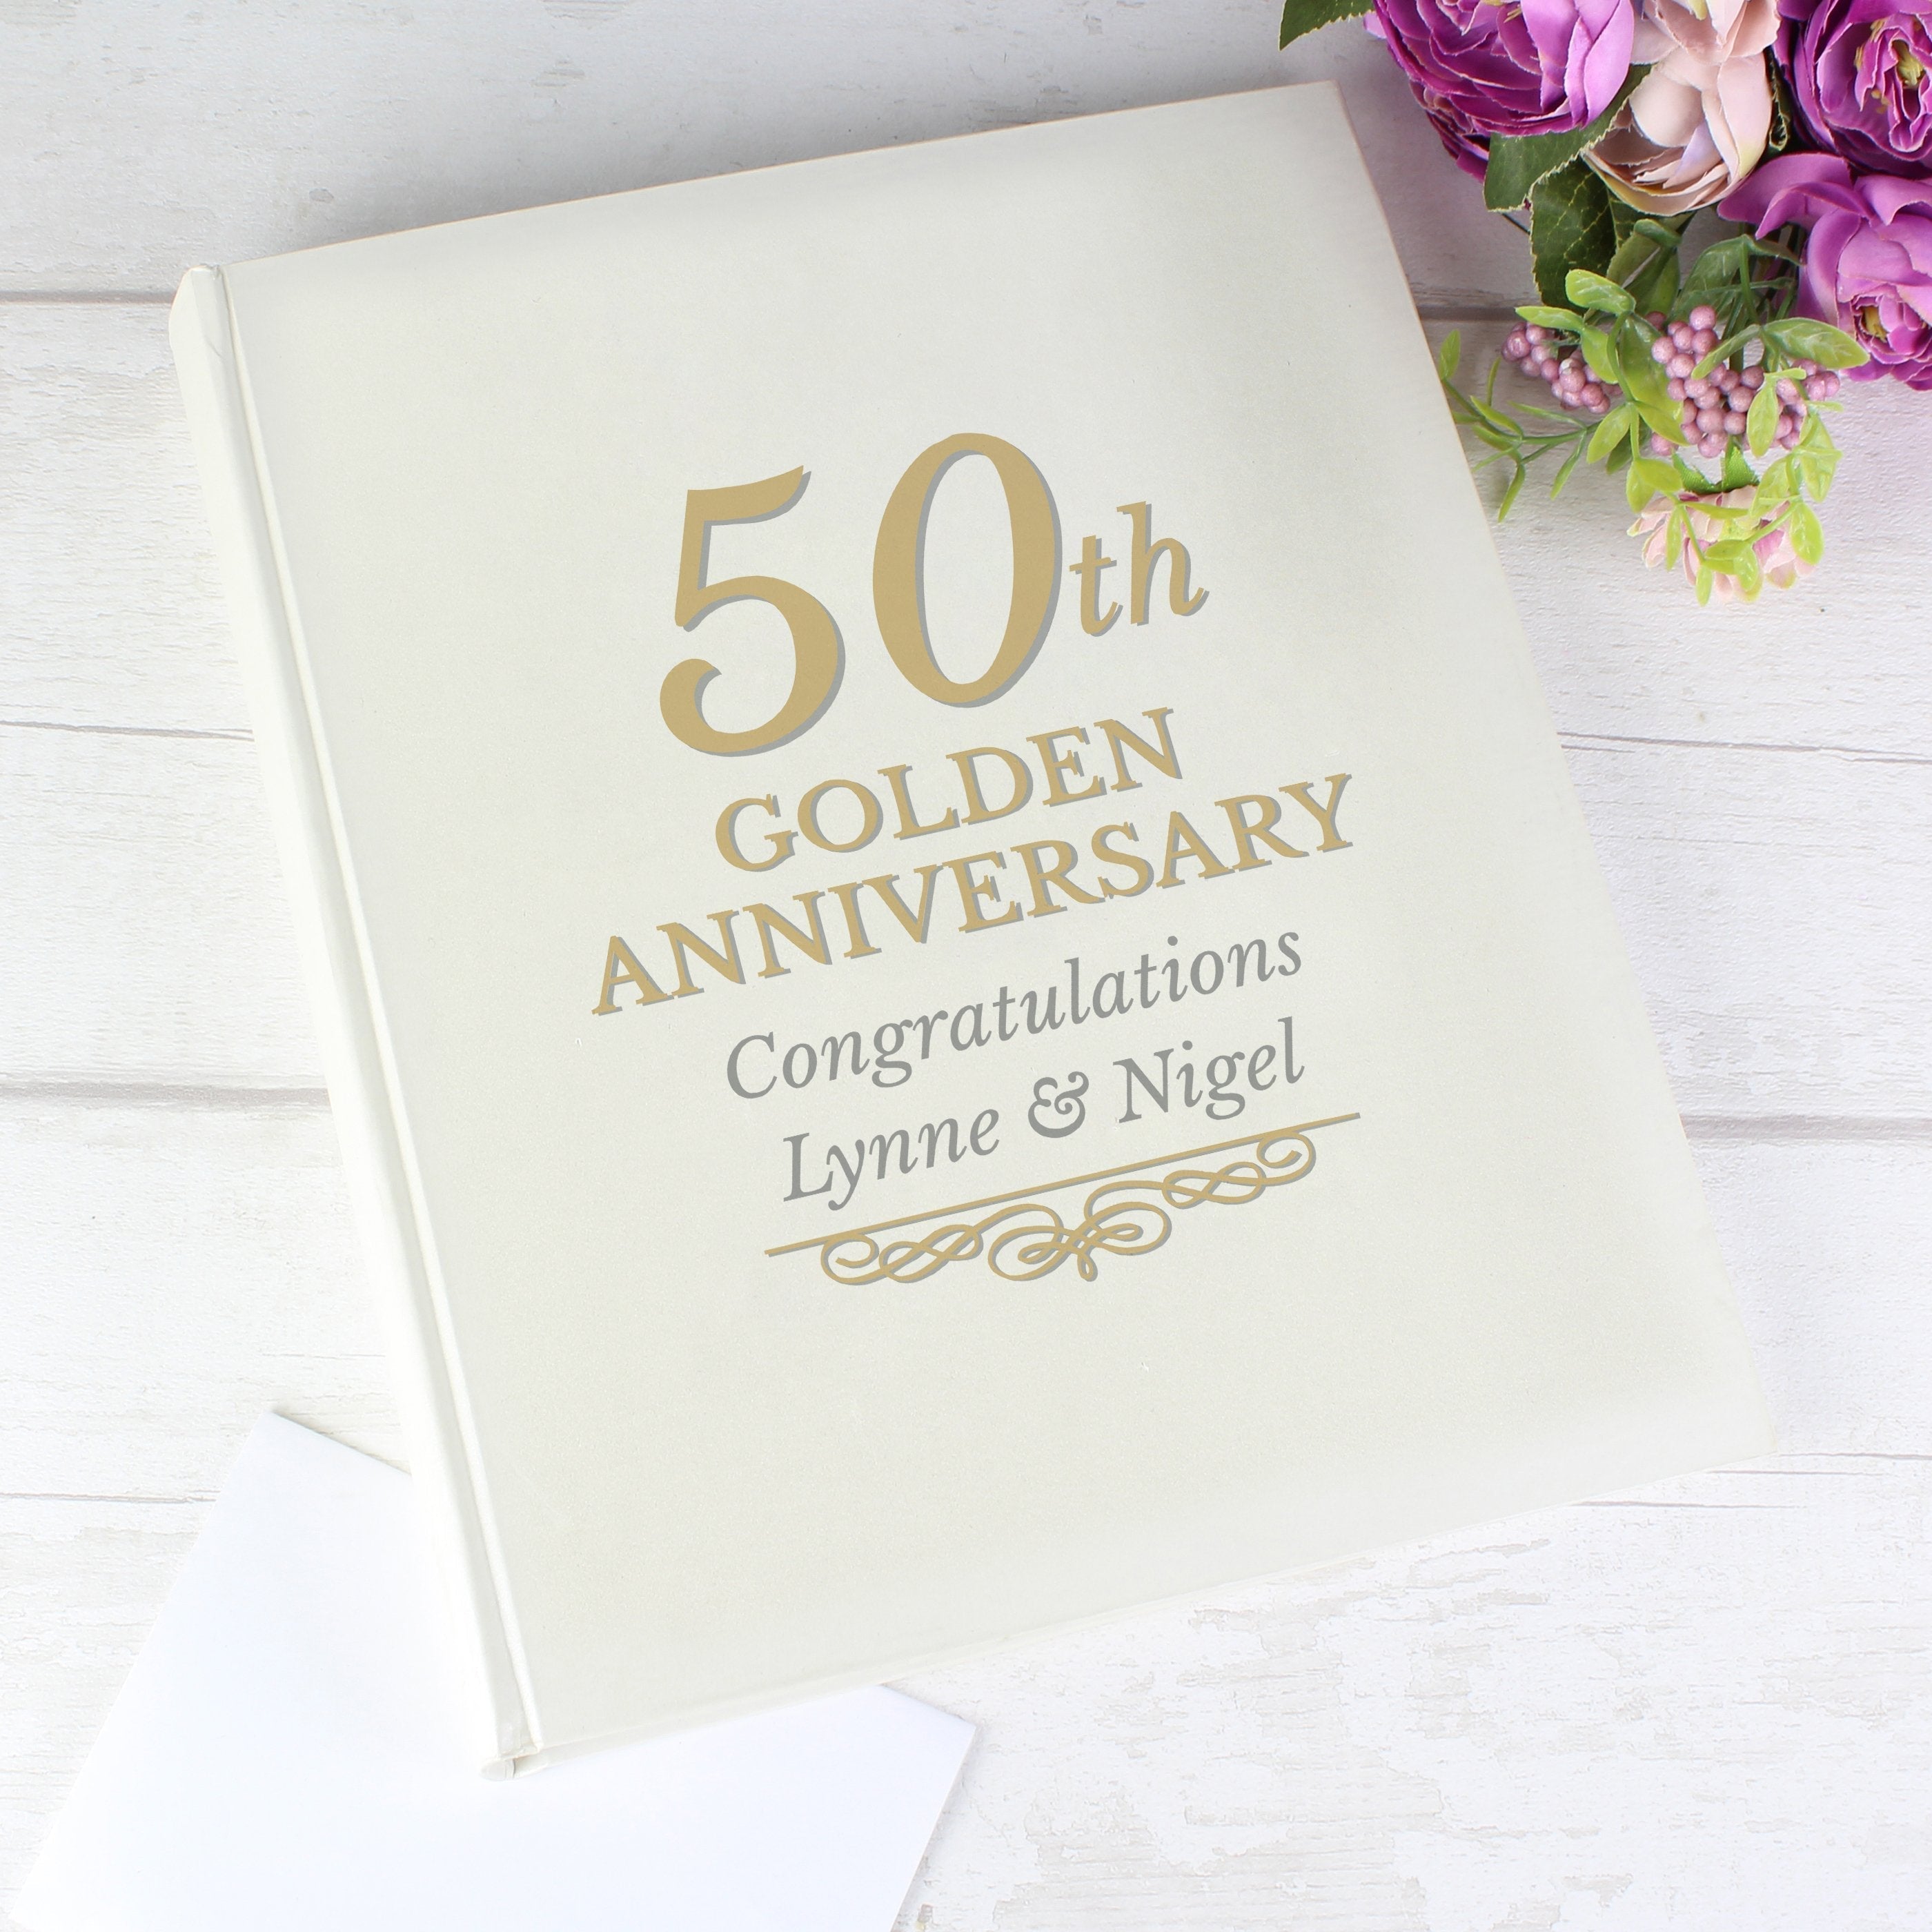 List of Anniversary Gifts by Year with Traditional and Modern Themes